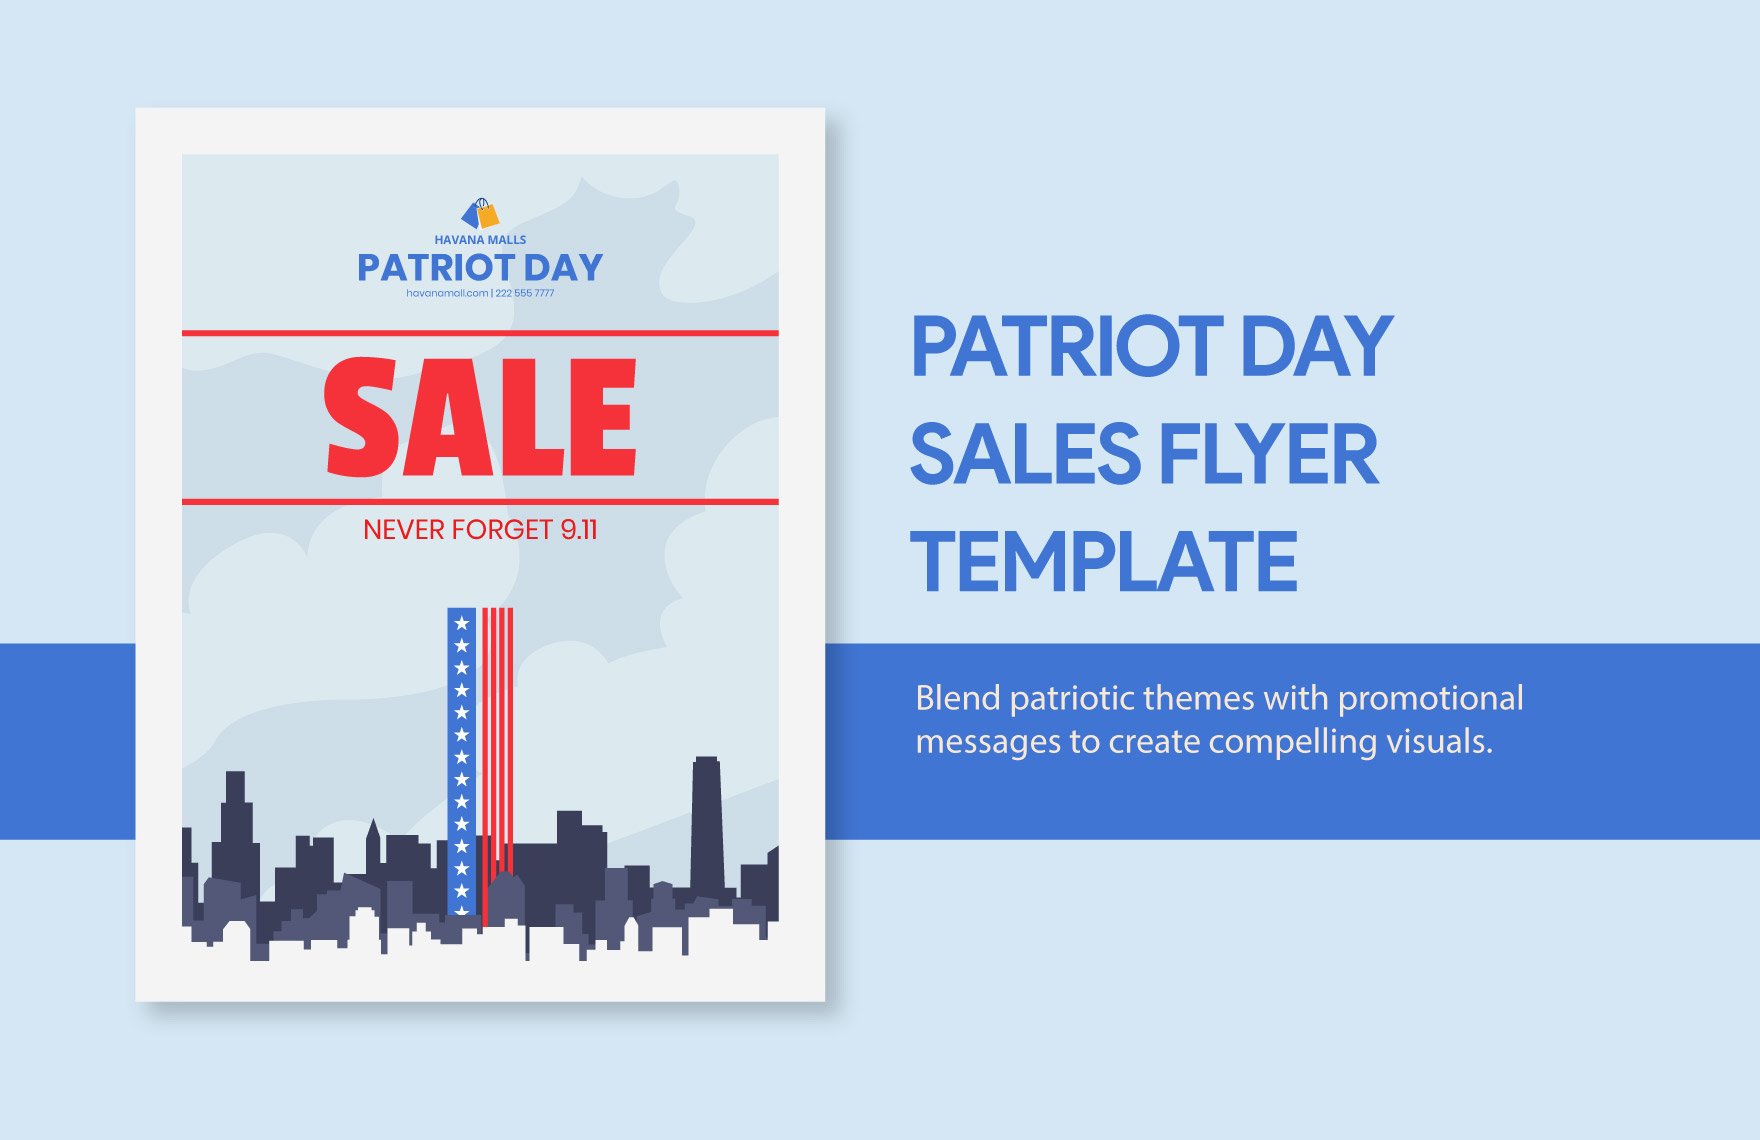 Patriot Day Sales Flyer Template